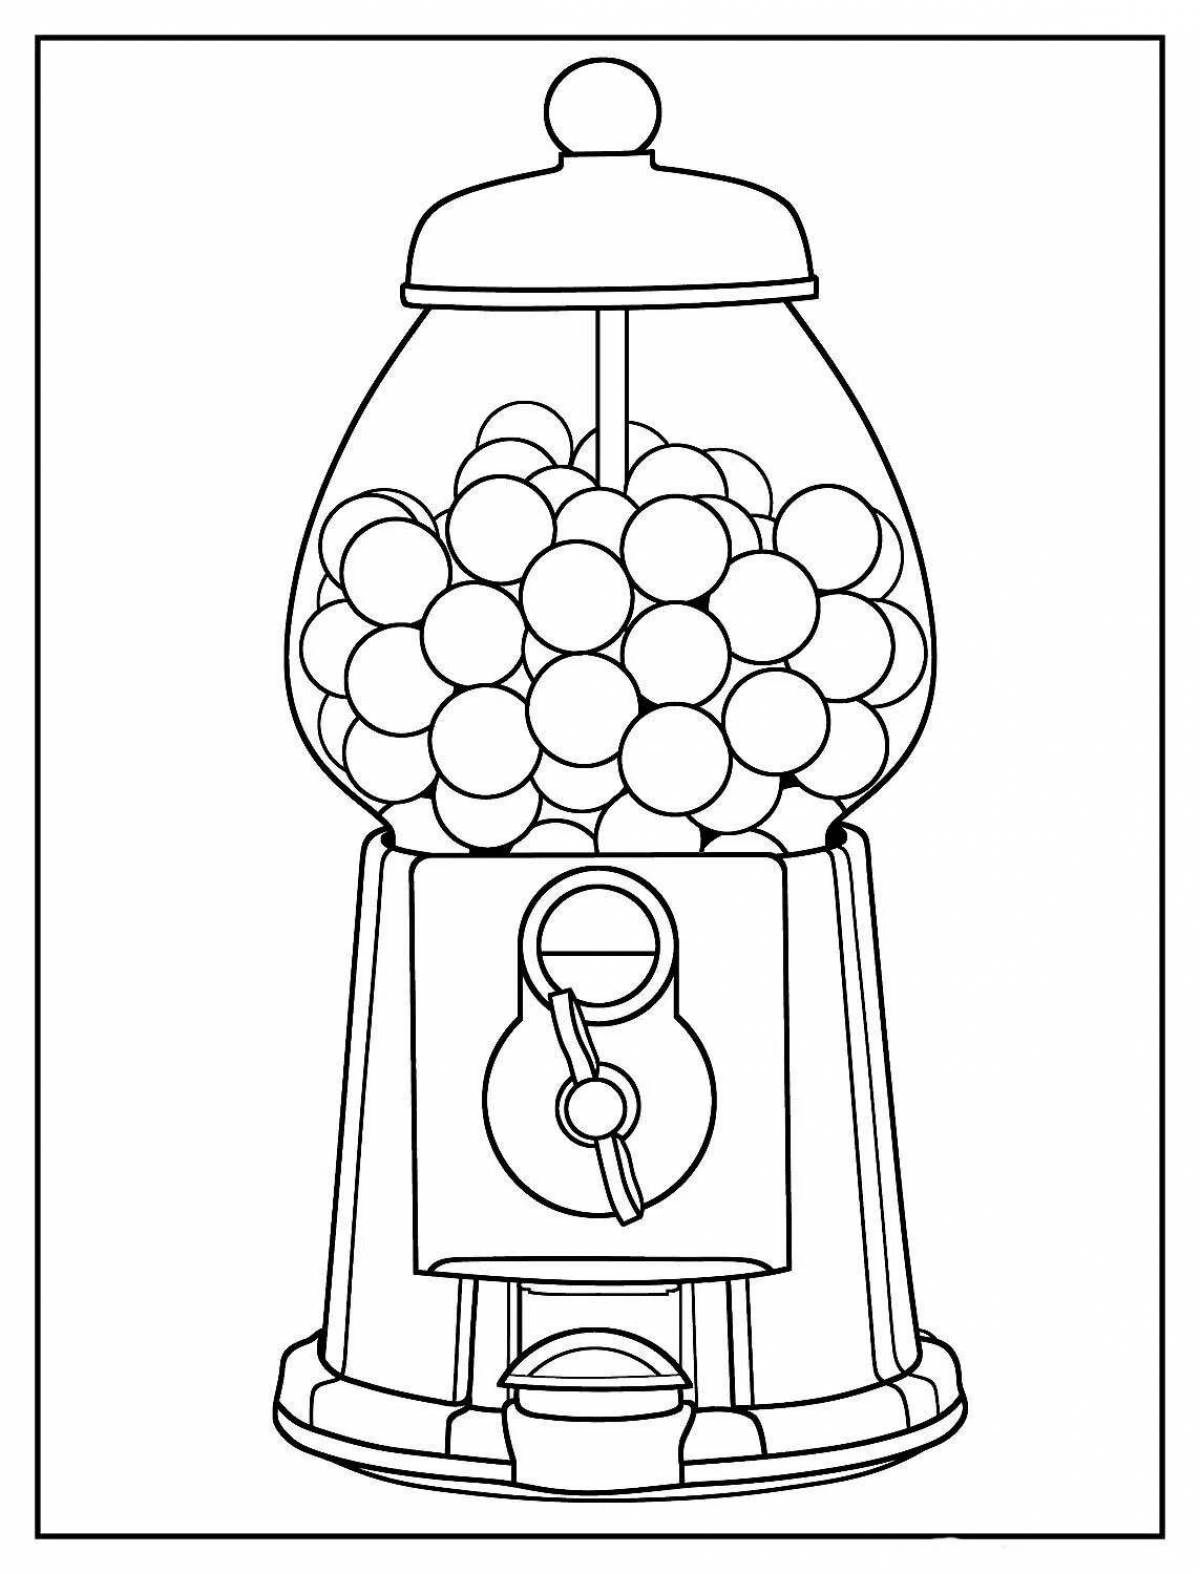 Coloring page of chewing gum in color package